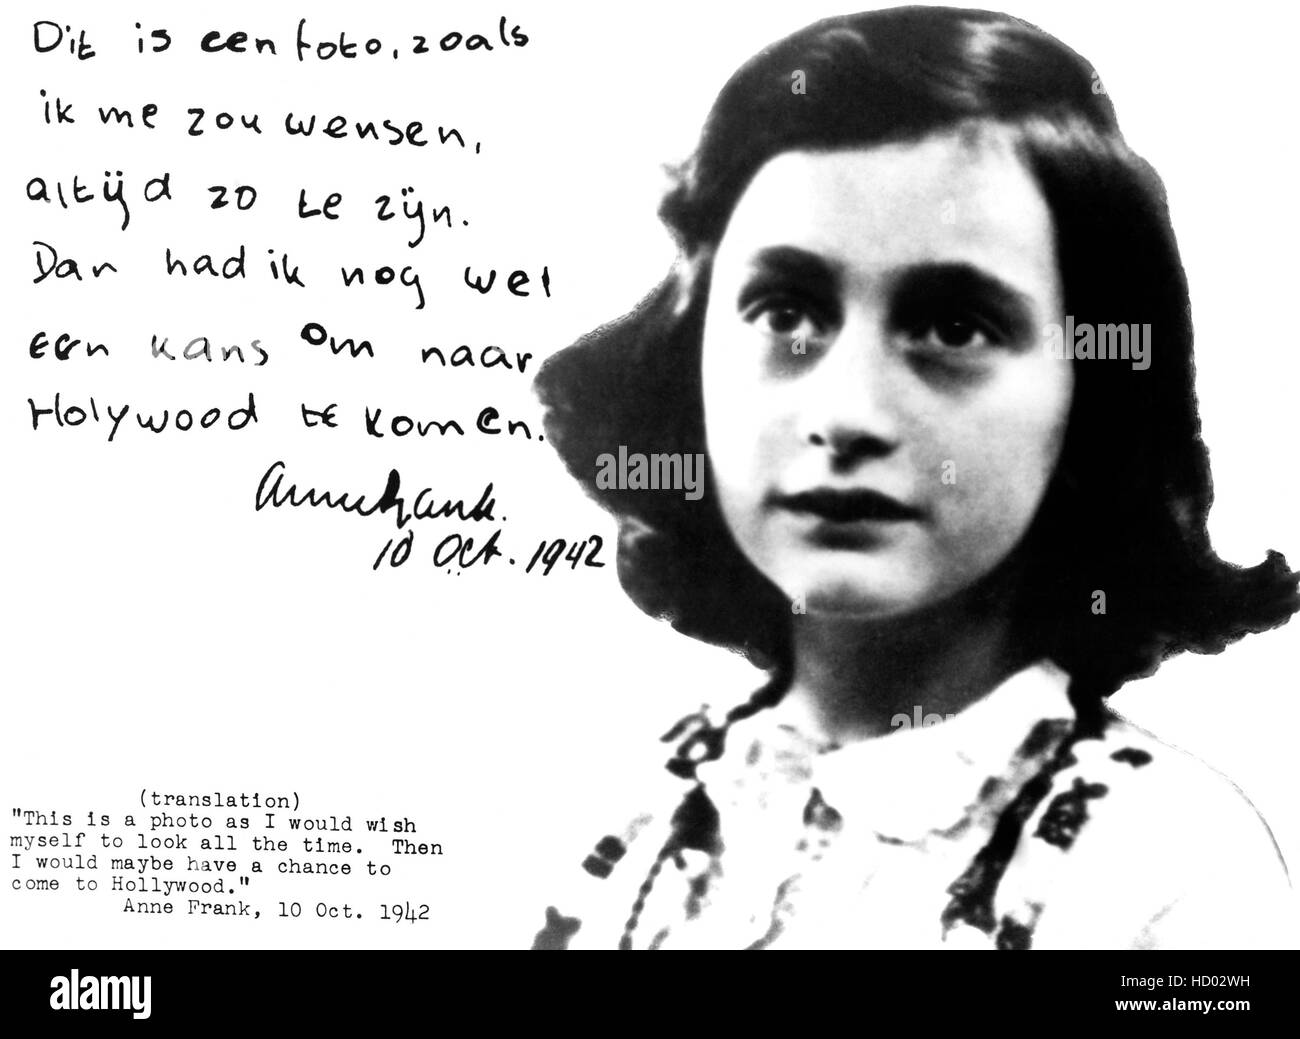 Anne Frank, portrait with writing from her own diary, ca. 1940s Stock Photo